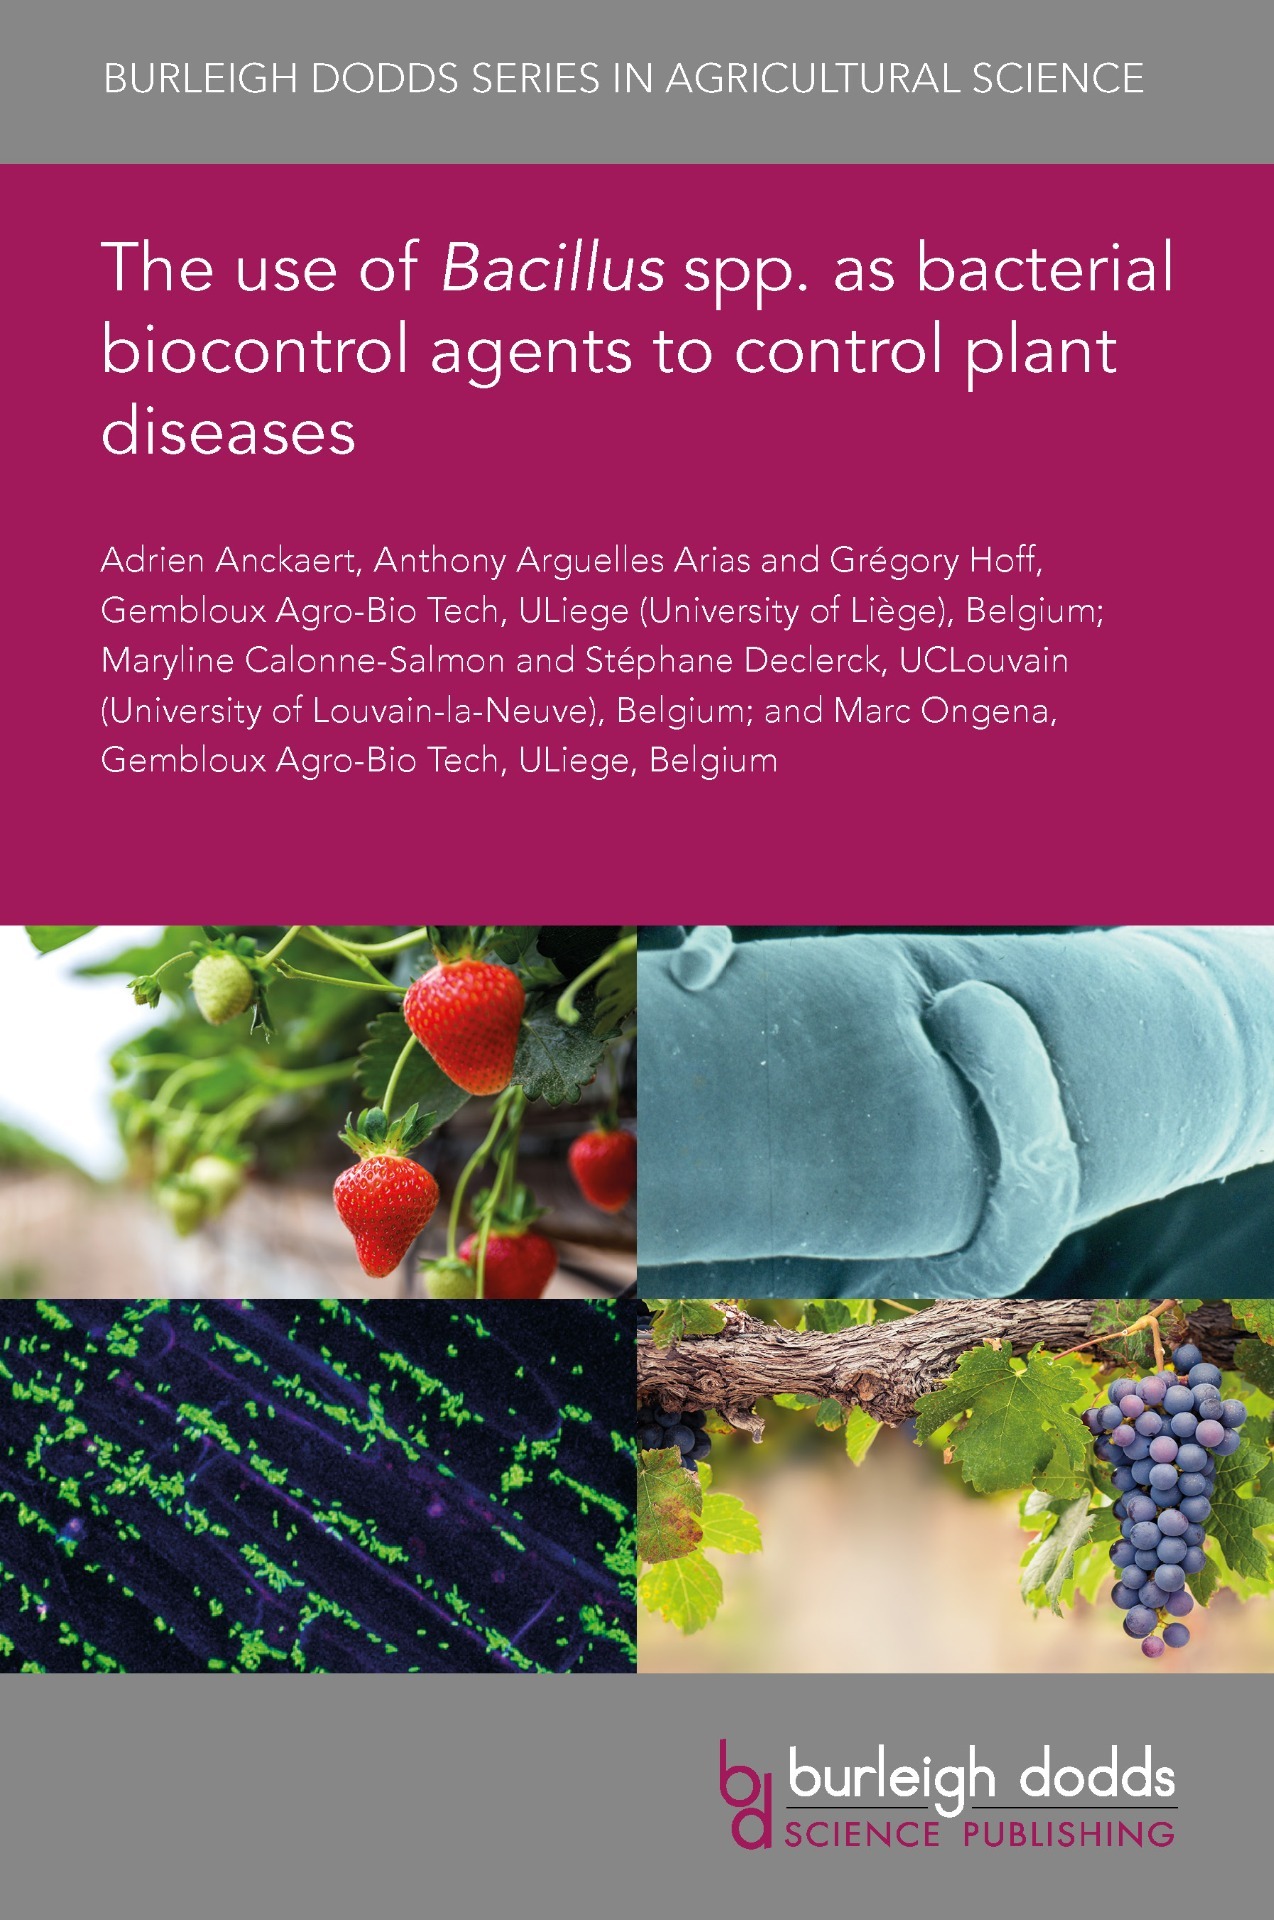 The use of Bacillus spp. as bacterial biocontrol agents to control plant diseases